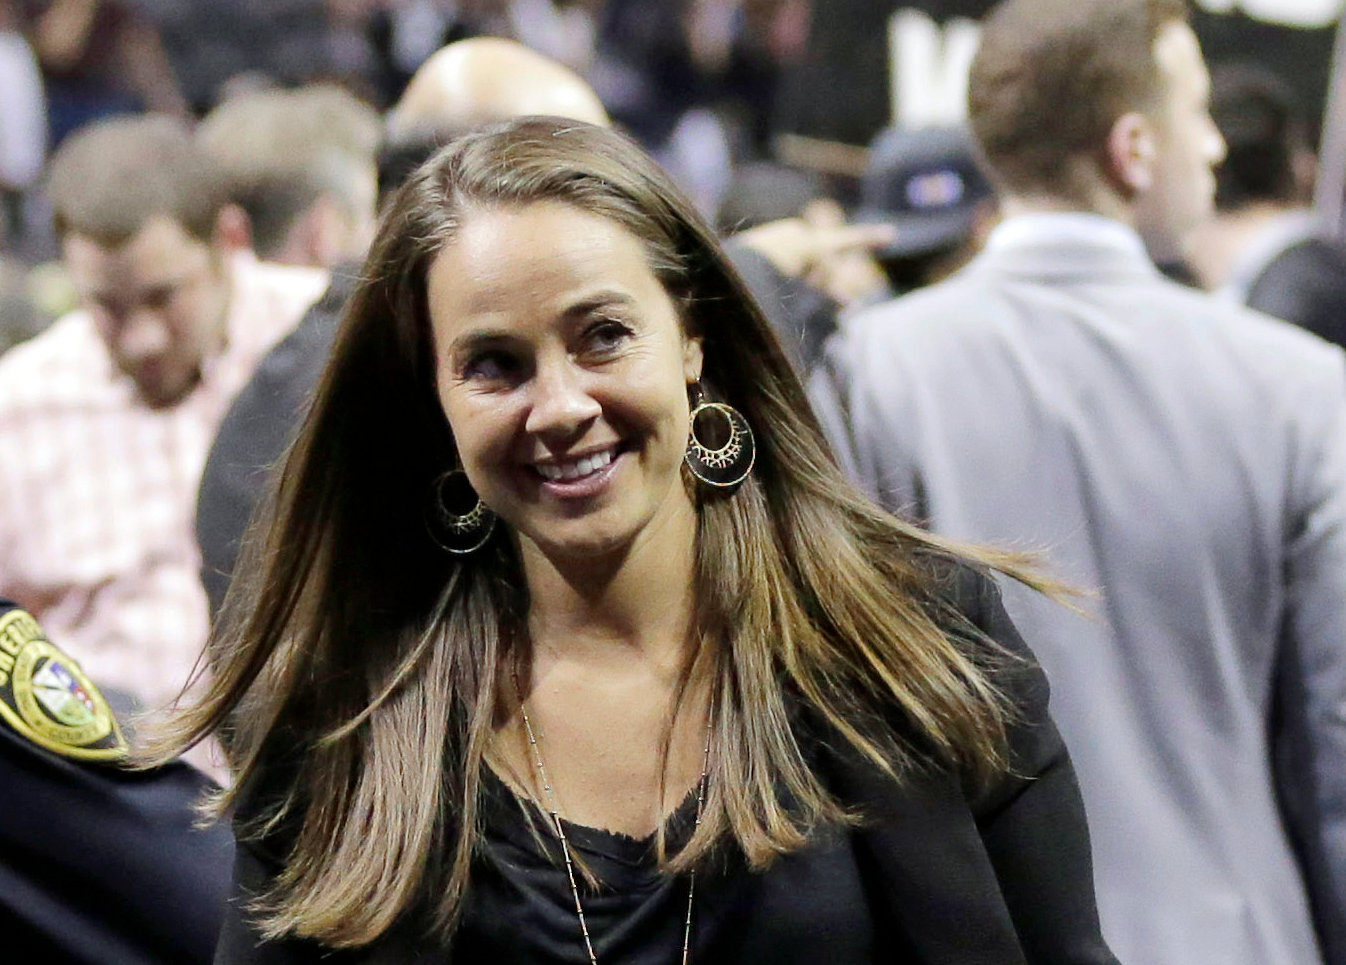 Before there was a rumor of Becky Hammon being a lesbian and dating Milano, there was speculation that she might be in an affair with Tony Parker, a former French-American professional basketball player. 